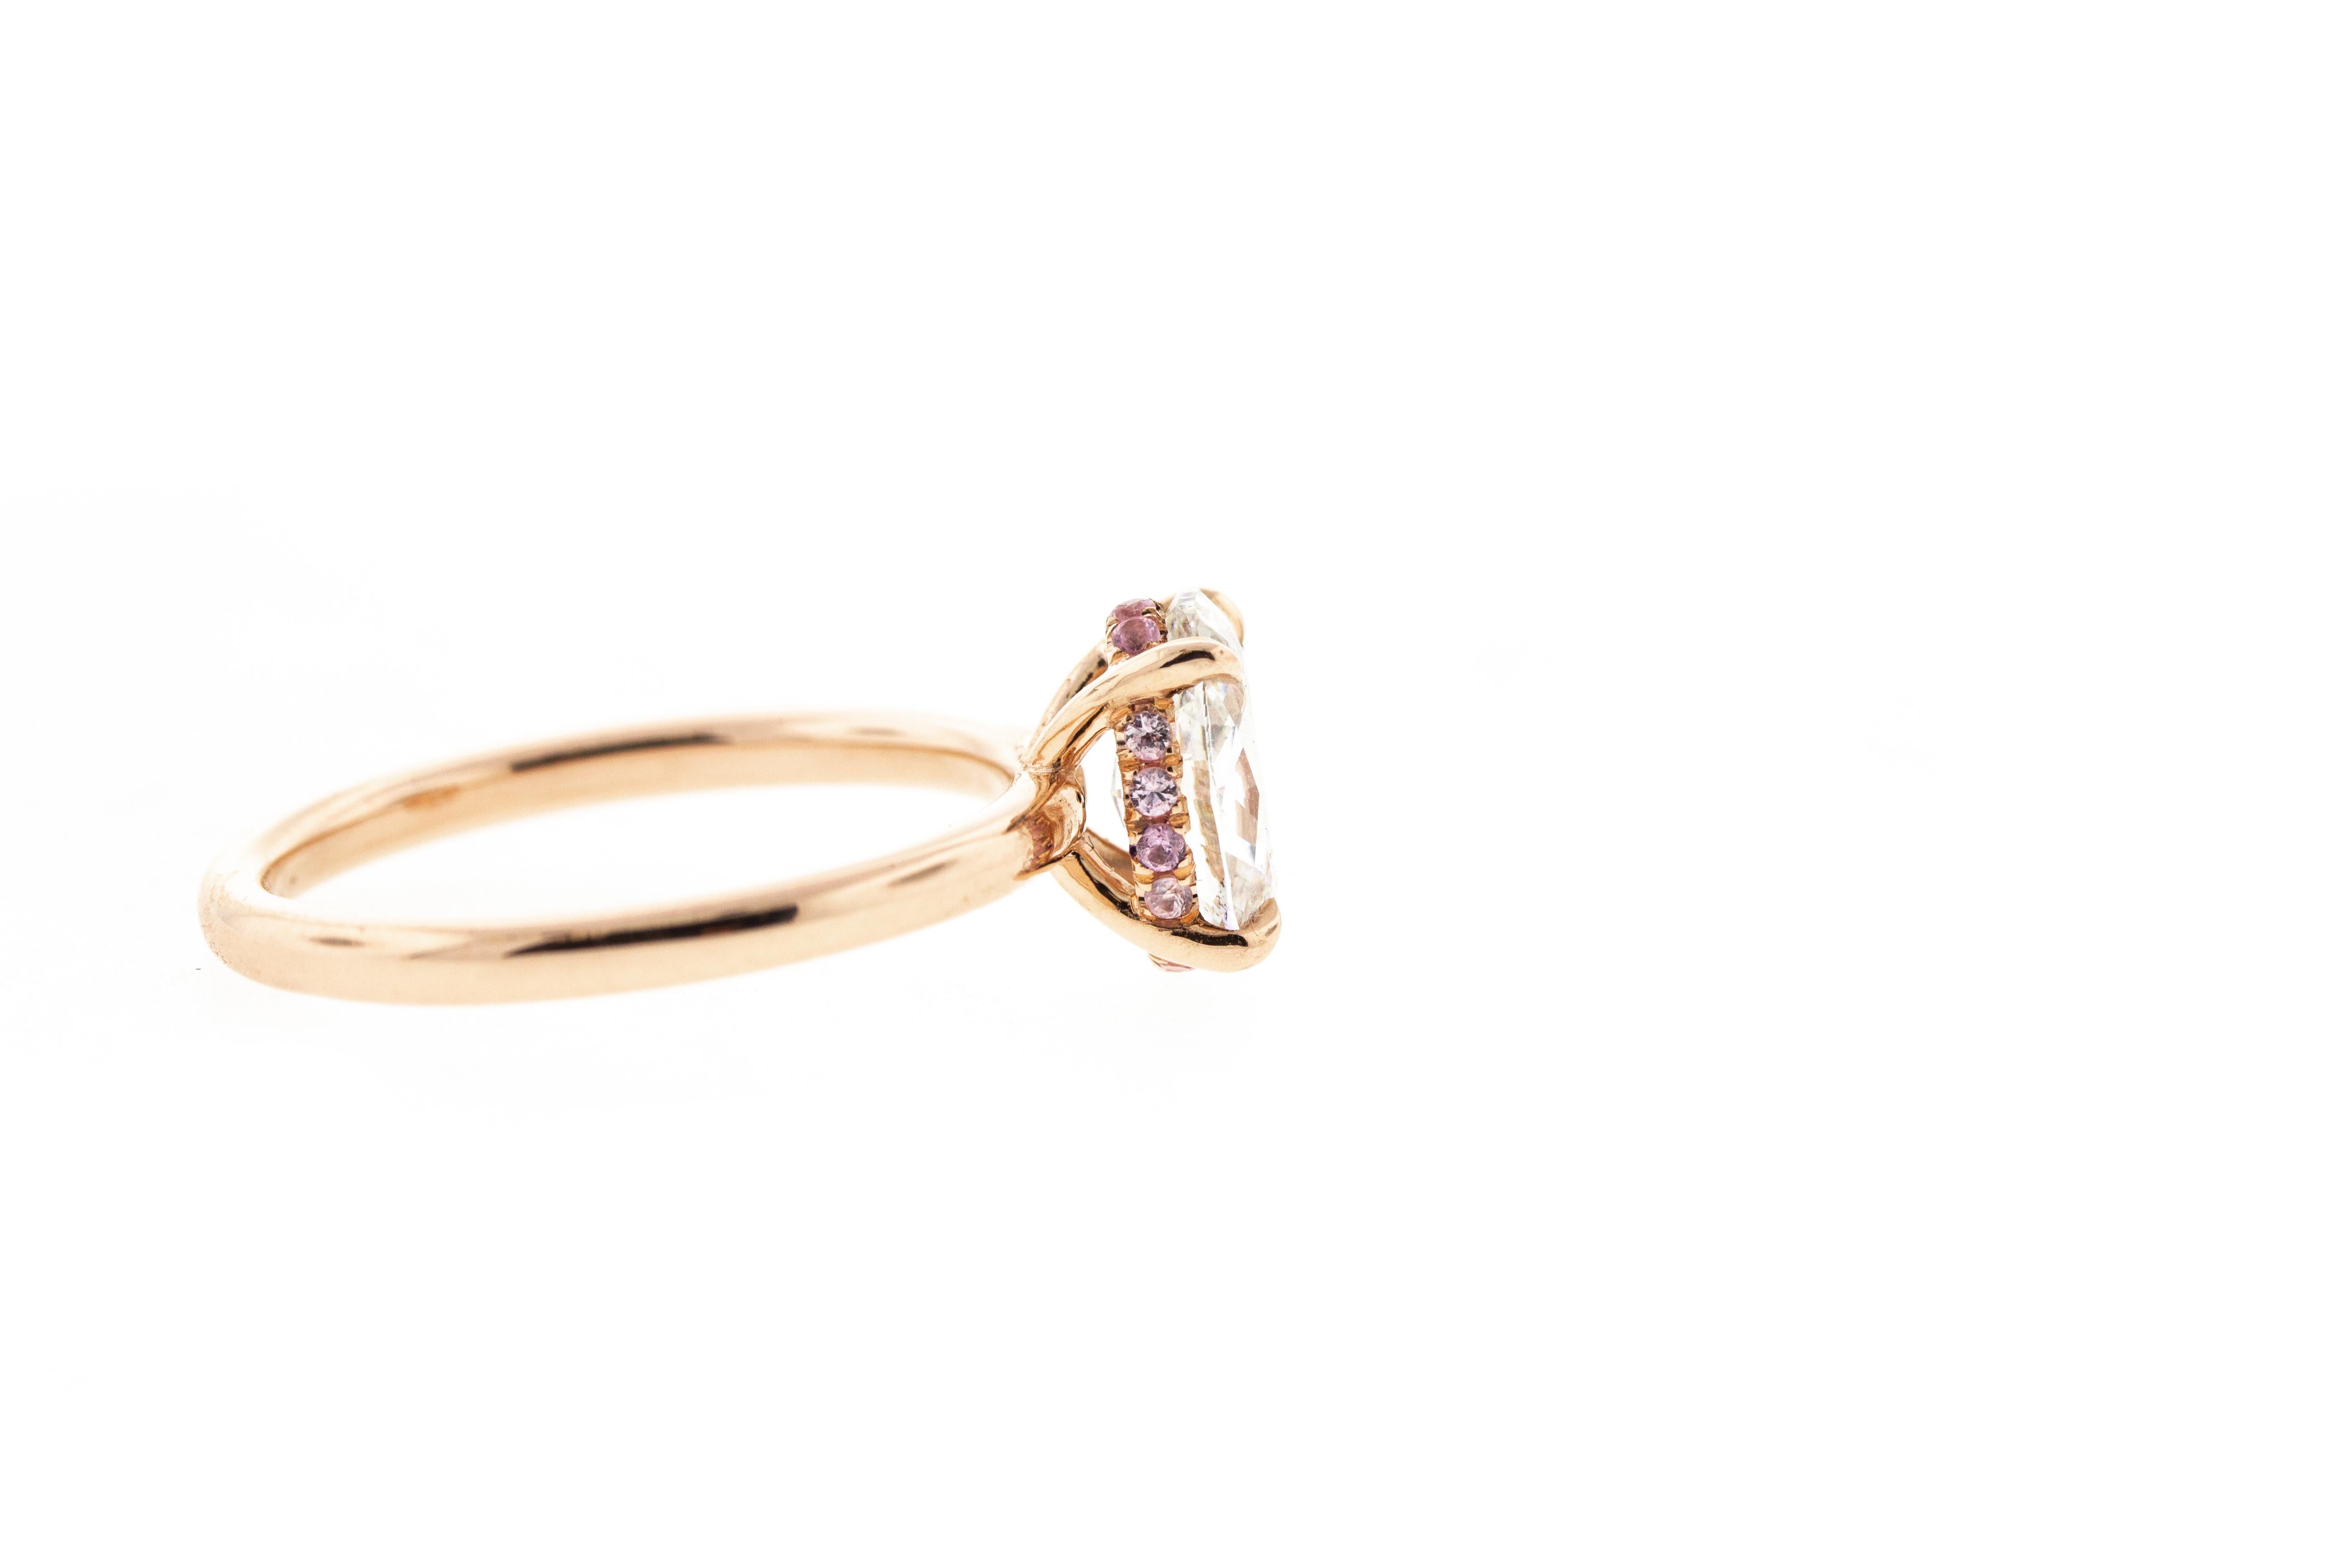 This rose gold engagement ring features an oval diamond for its center stone. A head-on shank setting with a hidden halo of pink sapphires encircles the center diamond. Made in rose gold, this ring can be customized in any color metal. 